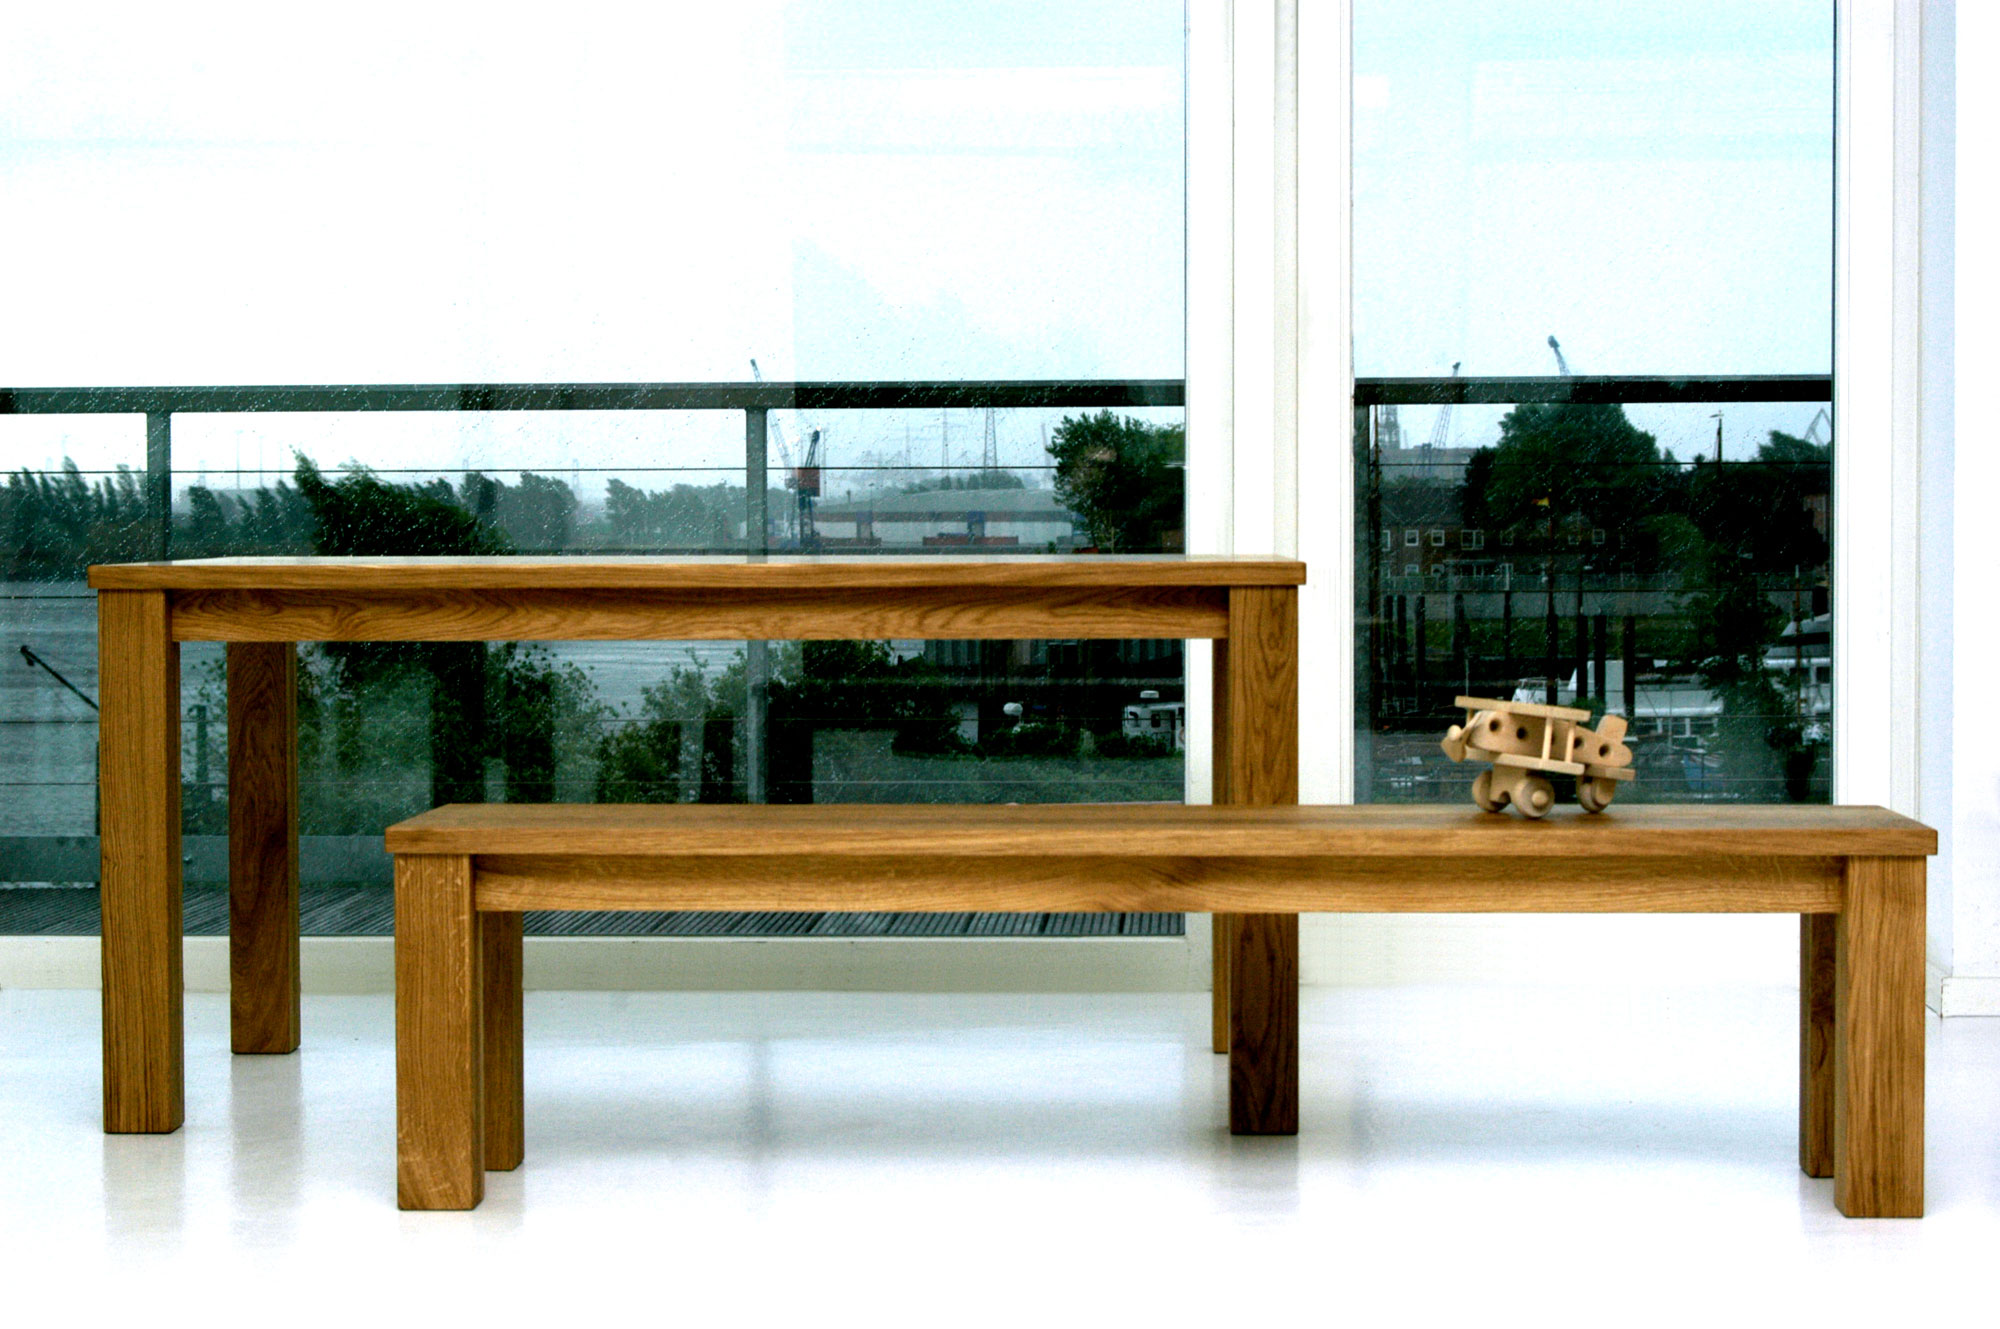 Tailor-Made Wood Table FORTE 3 B9X9 0064 custom made in solid wood by vitamin design